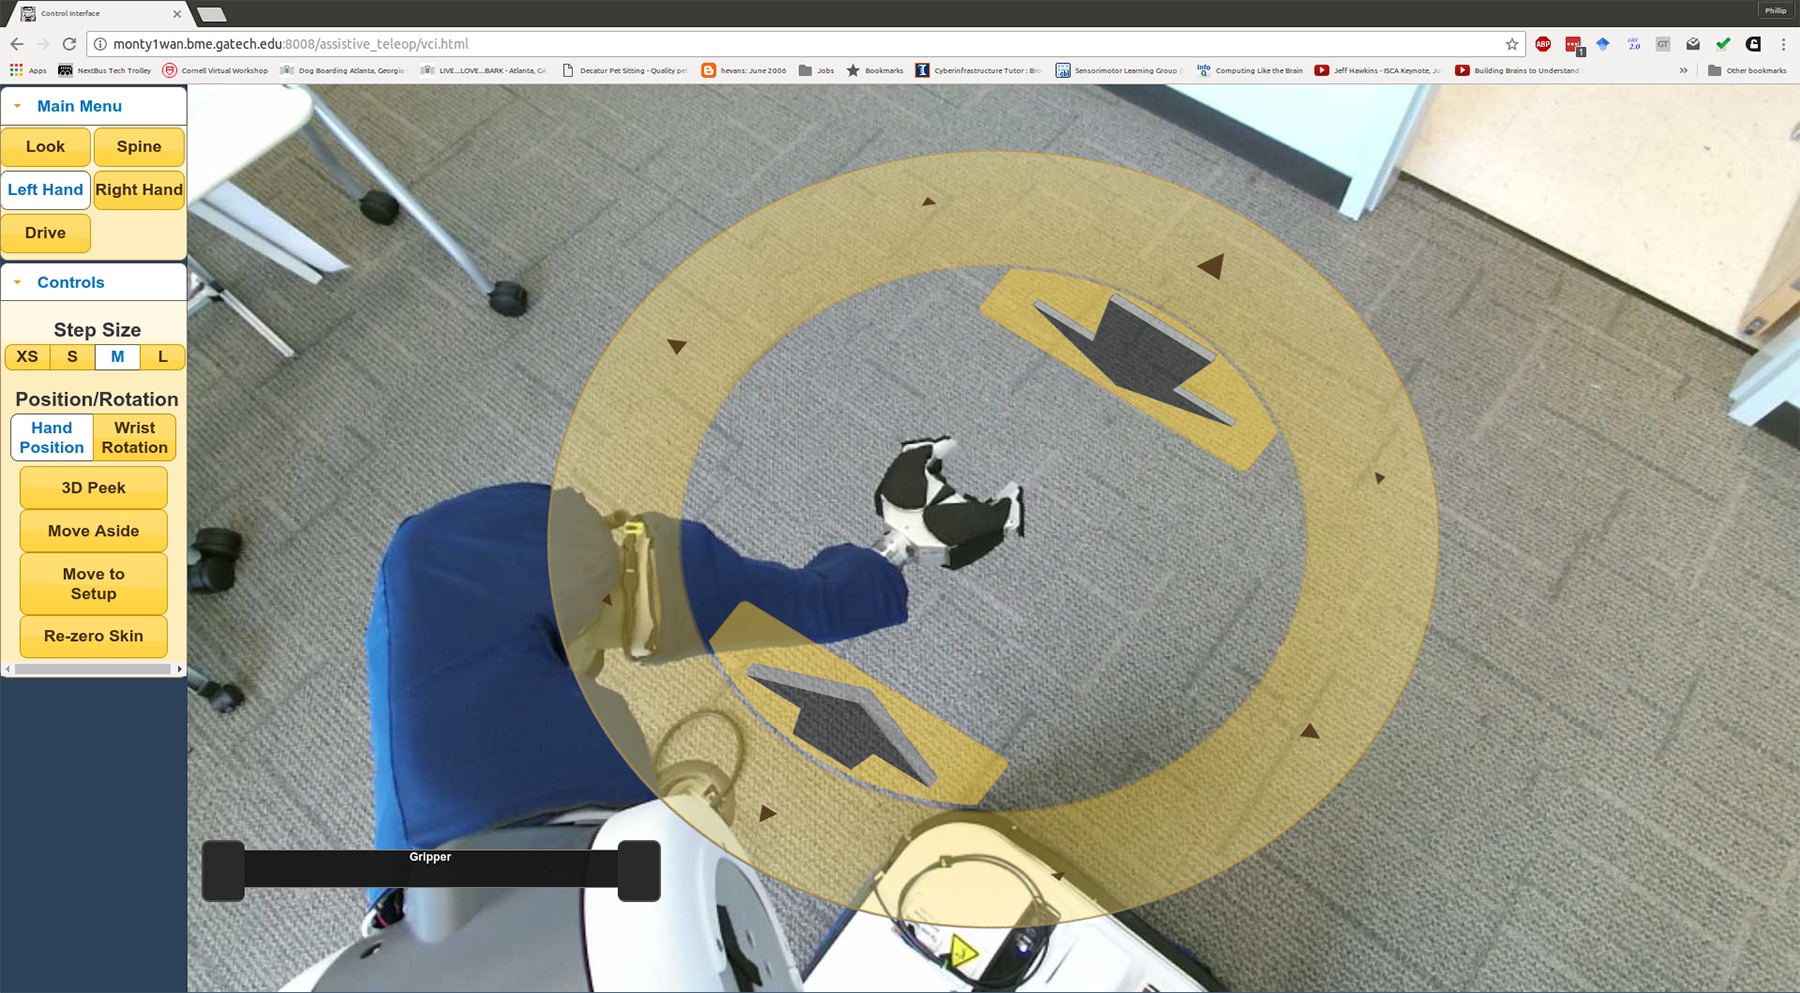 Image shows the view through the PR2’s cameras showing the environment around the robot. Clicking the yellow disc allows users the control the arm.